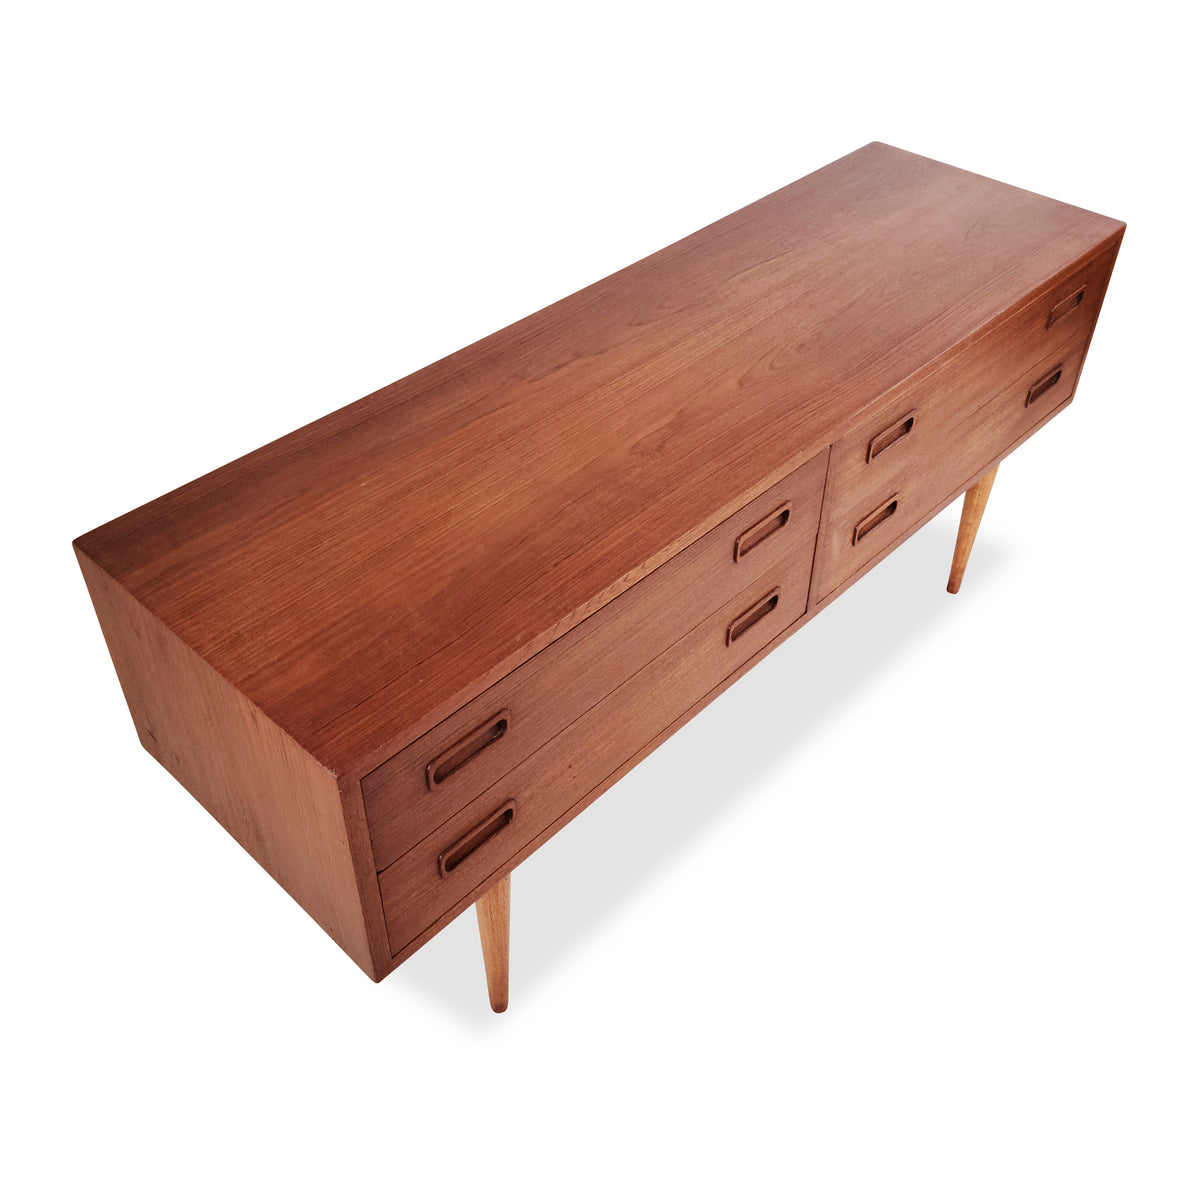 Teak Four Drawer Console by Poul Hundevad